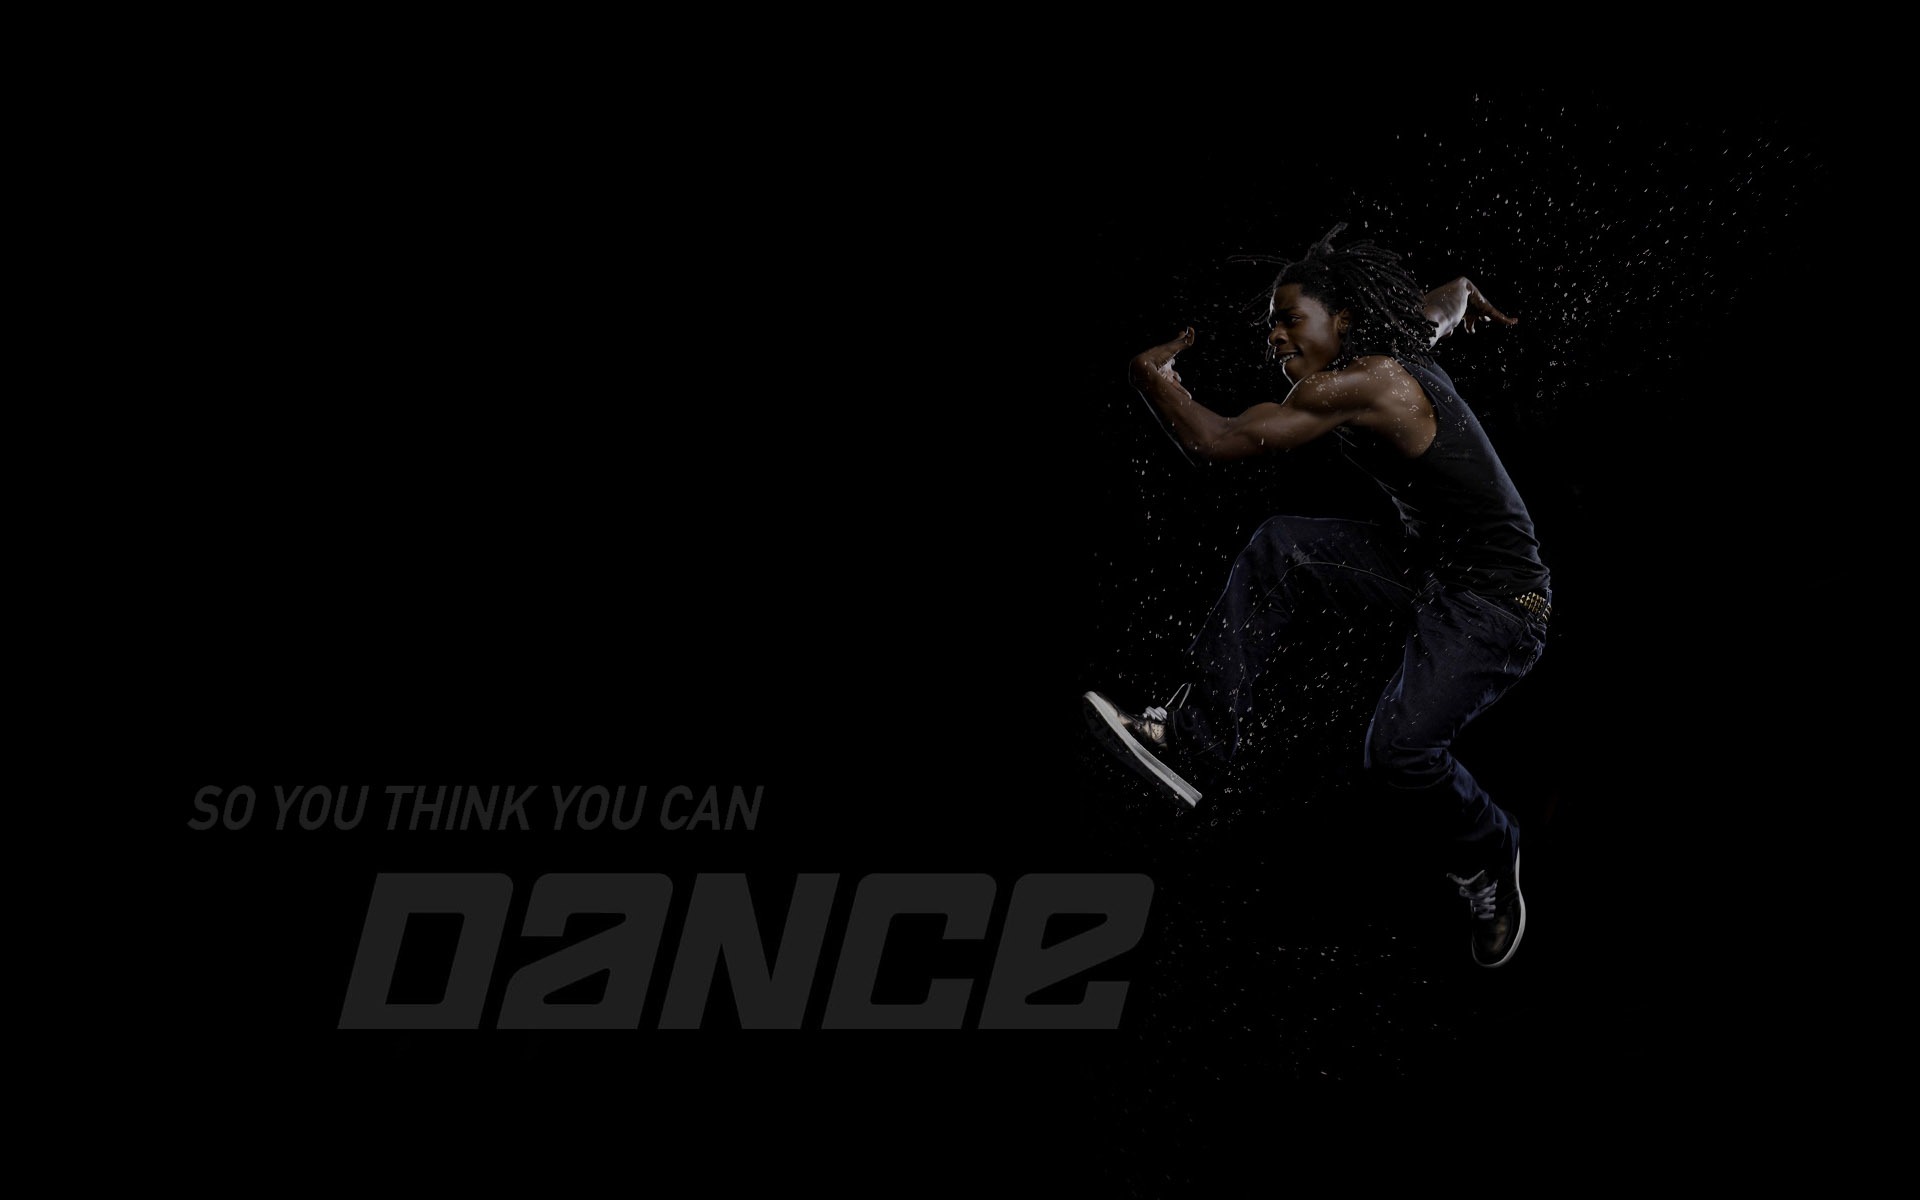 So You Think You Can Dance 舞林争霸 壁纸(二)16 - 1920x1200